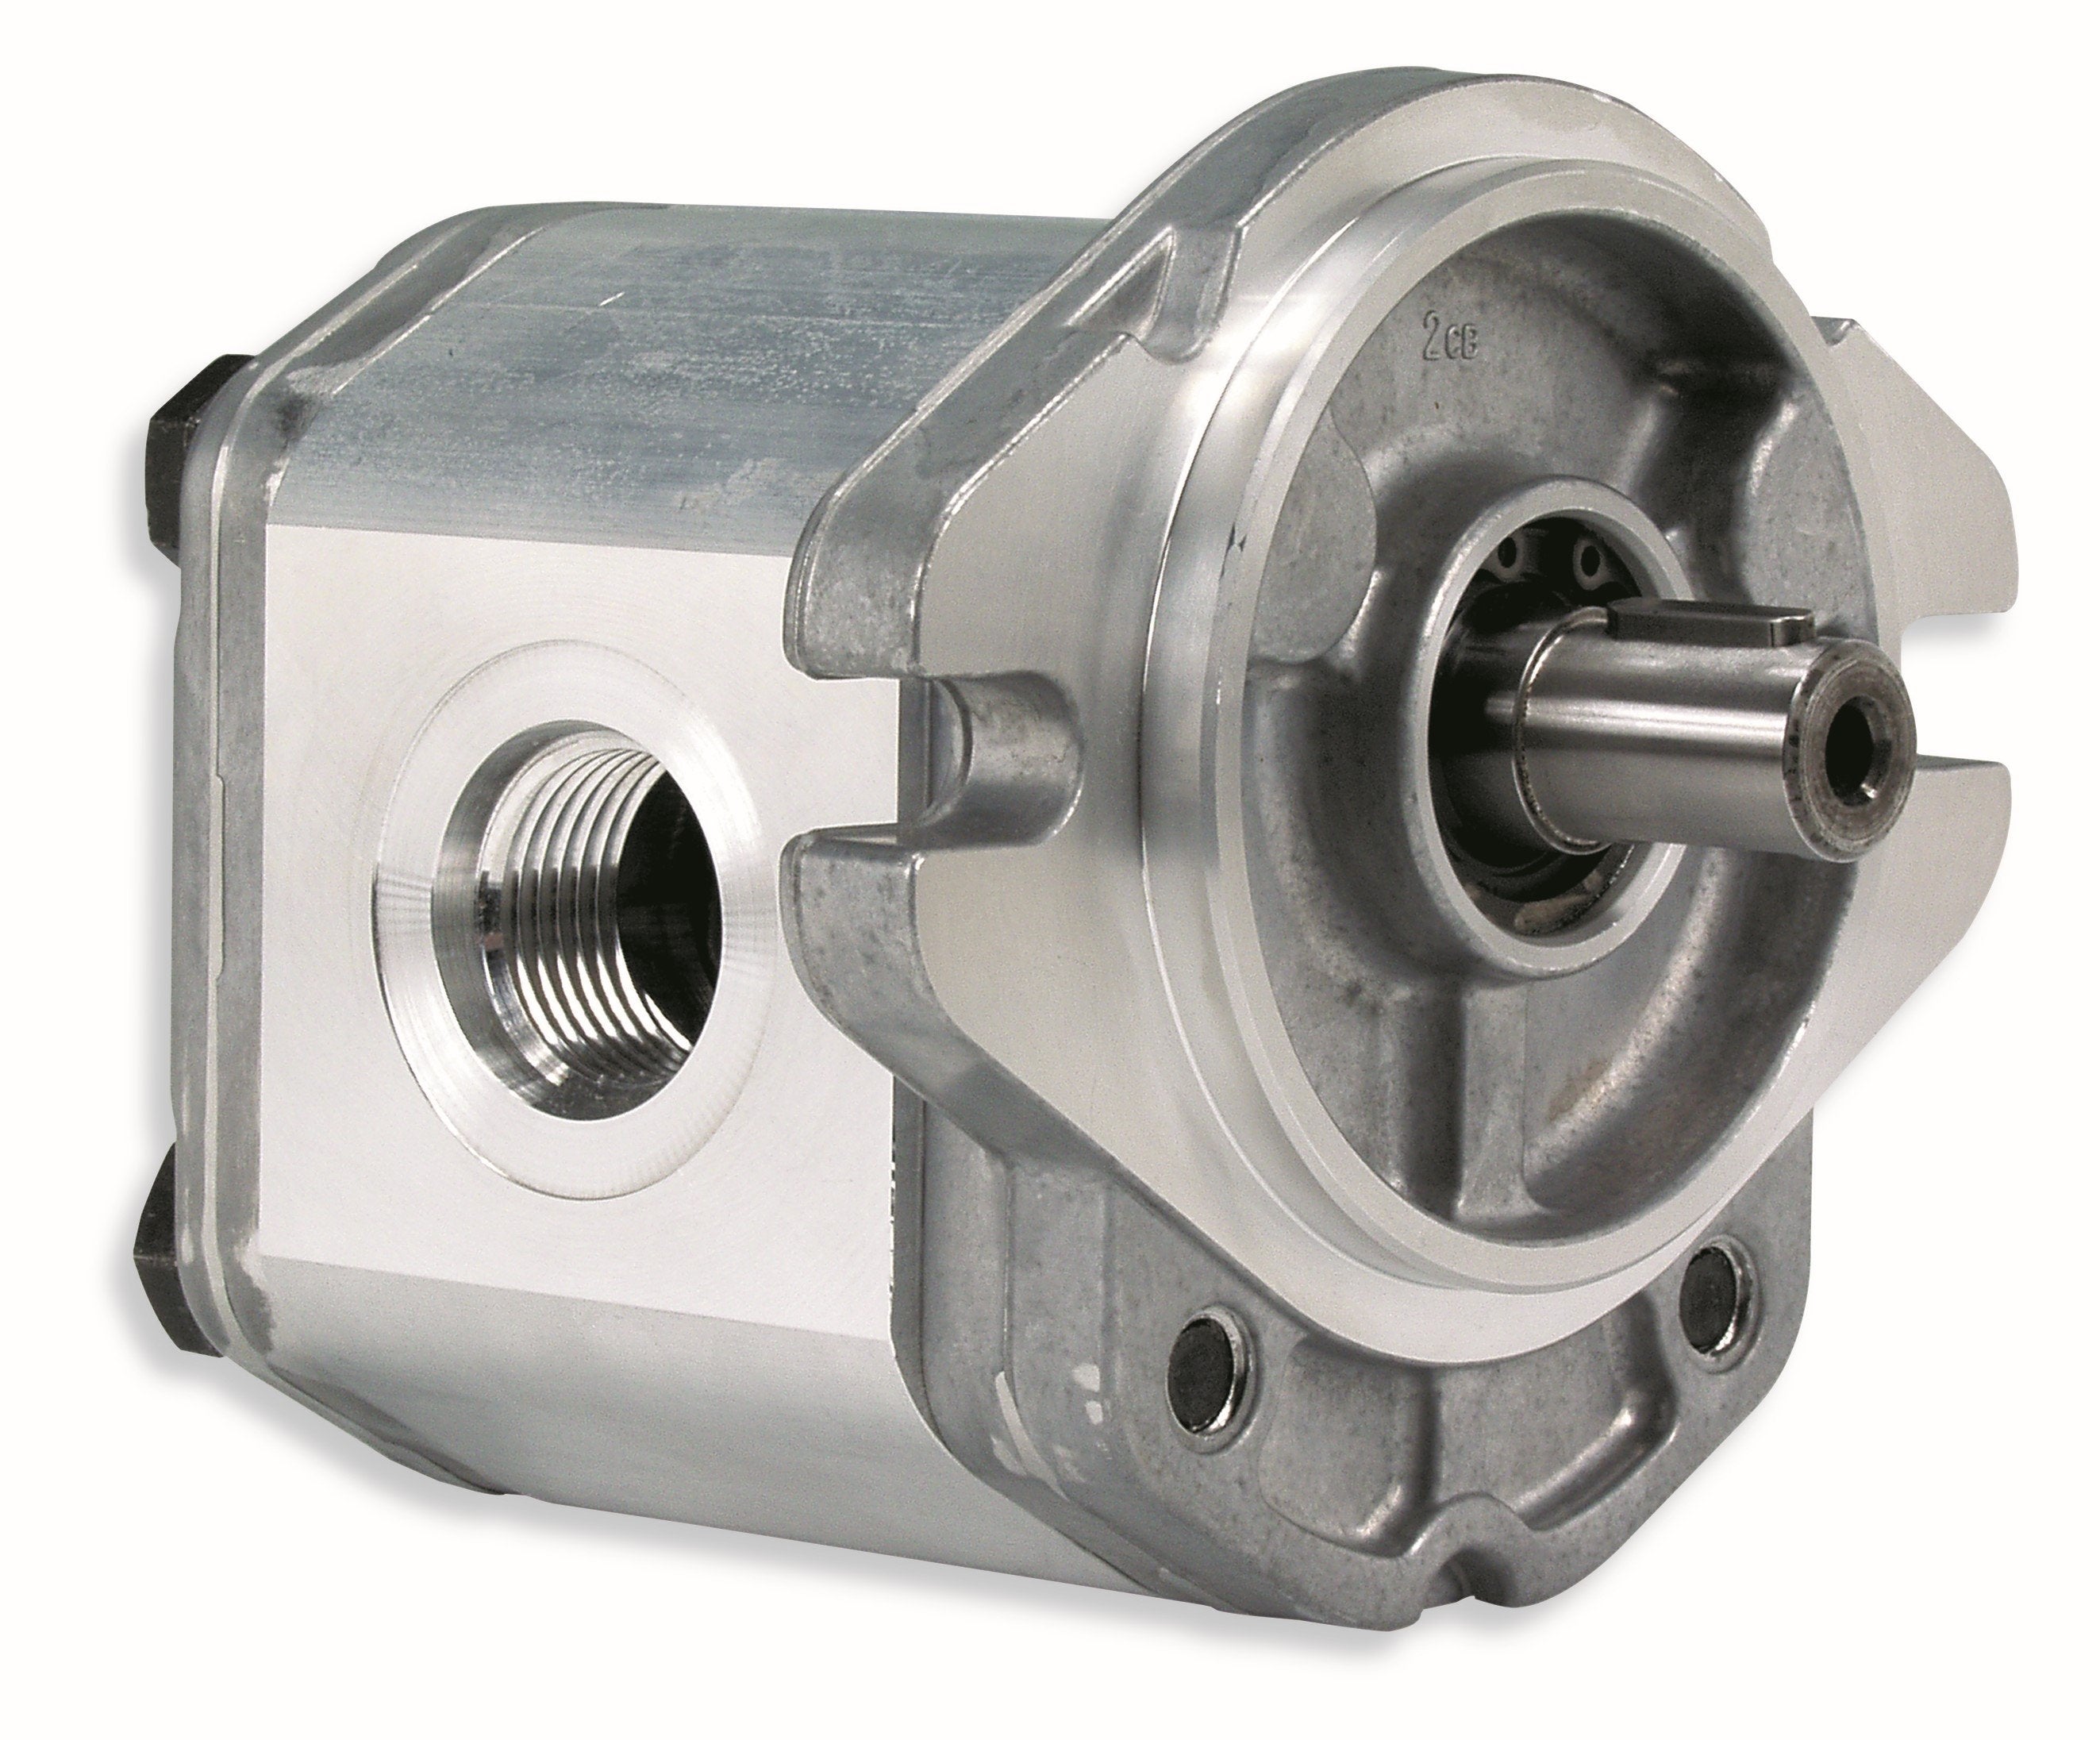 GHM2A-R-30-S1-E2 : Marzocchi Gear Motor, Bidirectional, 21.1cc, 3335psi rated, 2200RPM, 0.75 (3/4") #12 SAE ports, 9T 16/32DP Splined Shaft